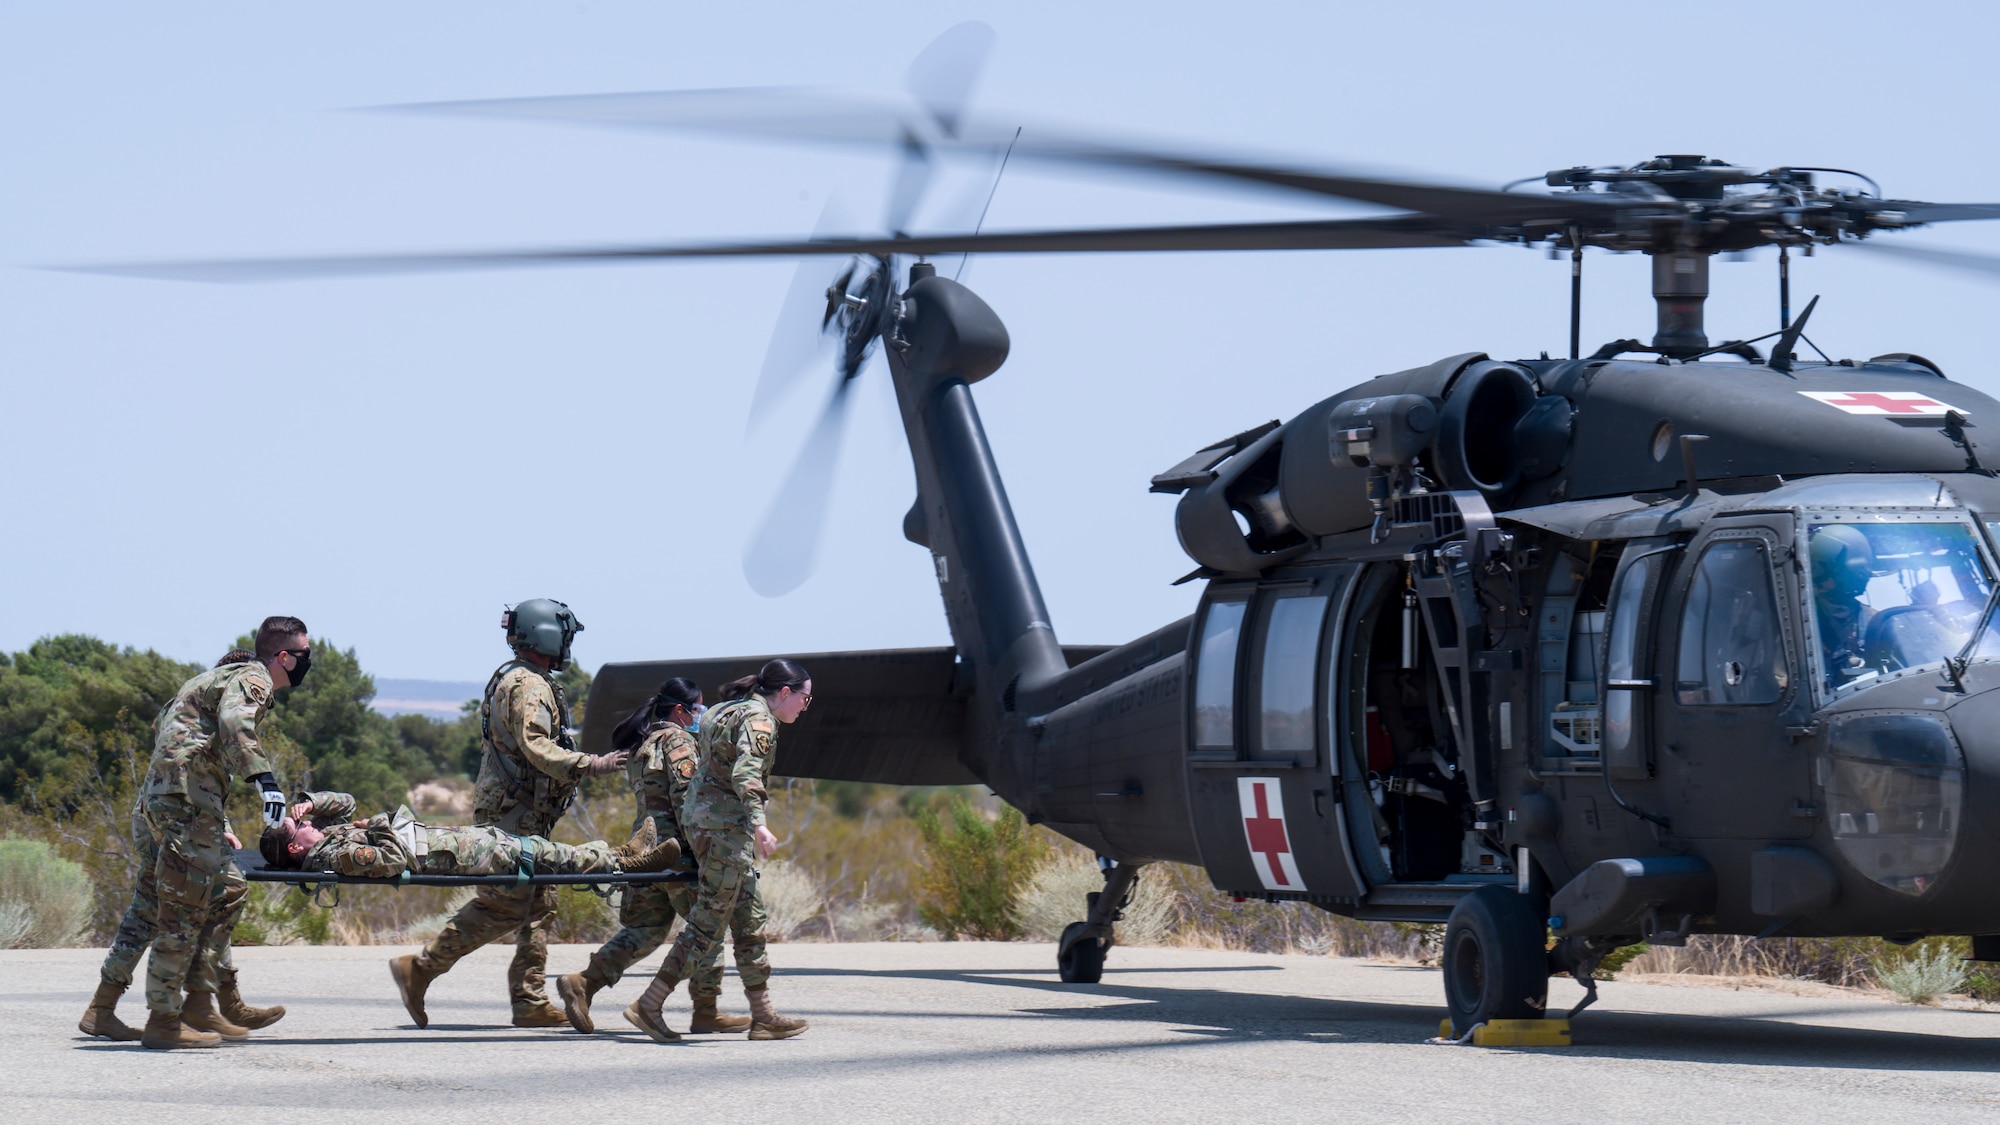 412th Medical Group personnel approach a UH-60 Blackhawk helicoper during a training session at Edwards Air Force Base, California, July 15. Soldiers from C Company, "Desert Dustoff," 2916th Aviation Battalion, 916th Support Brigade, out of Fort Irwin, provided the training to the Edwards AFB Airmen. (Air Force photo by Giancarlo Casem)